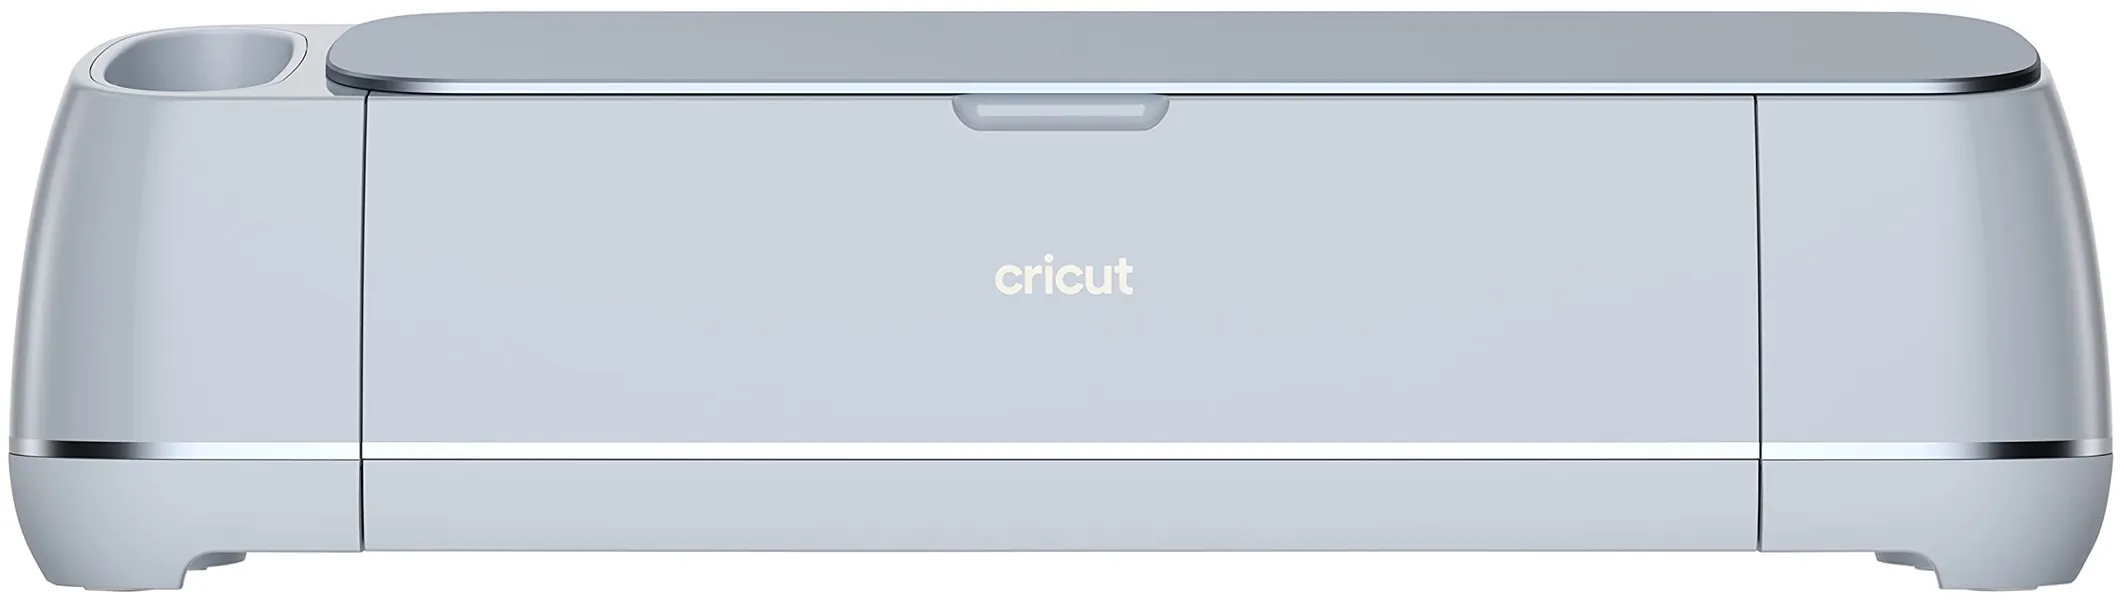 Cricut Maker 3 Smart Cutting Machine, 2X Faster & 10X Cutting Force, Matless Cutting with Smart Materials, Cuts 300+ Materials, Bluetooth Connectivity, Compatible with iOS, Android, Windows & Mac - Cricut Maker 3